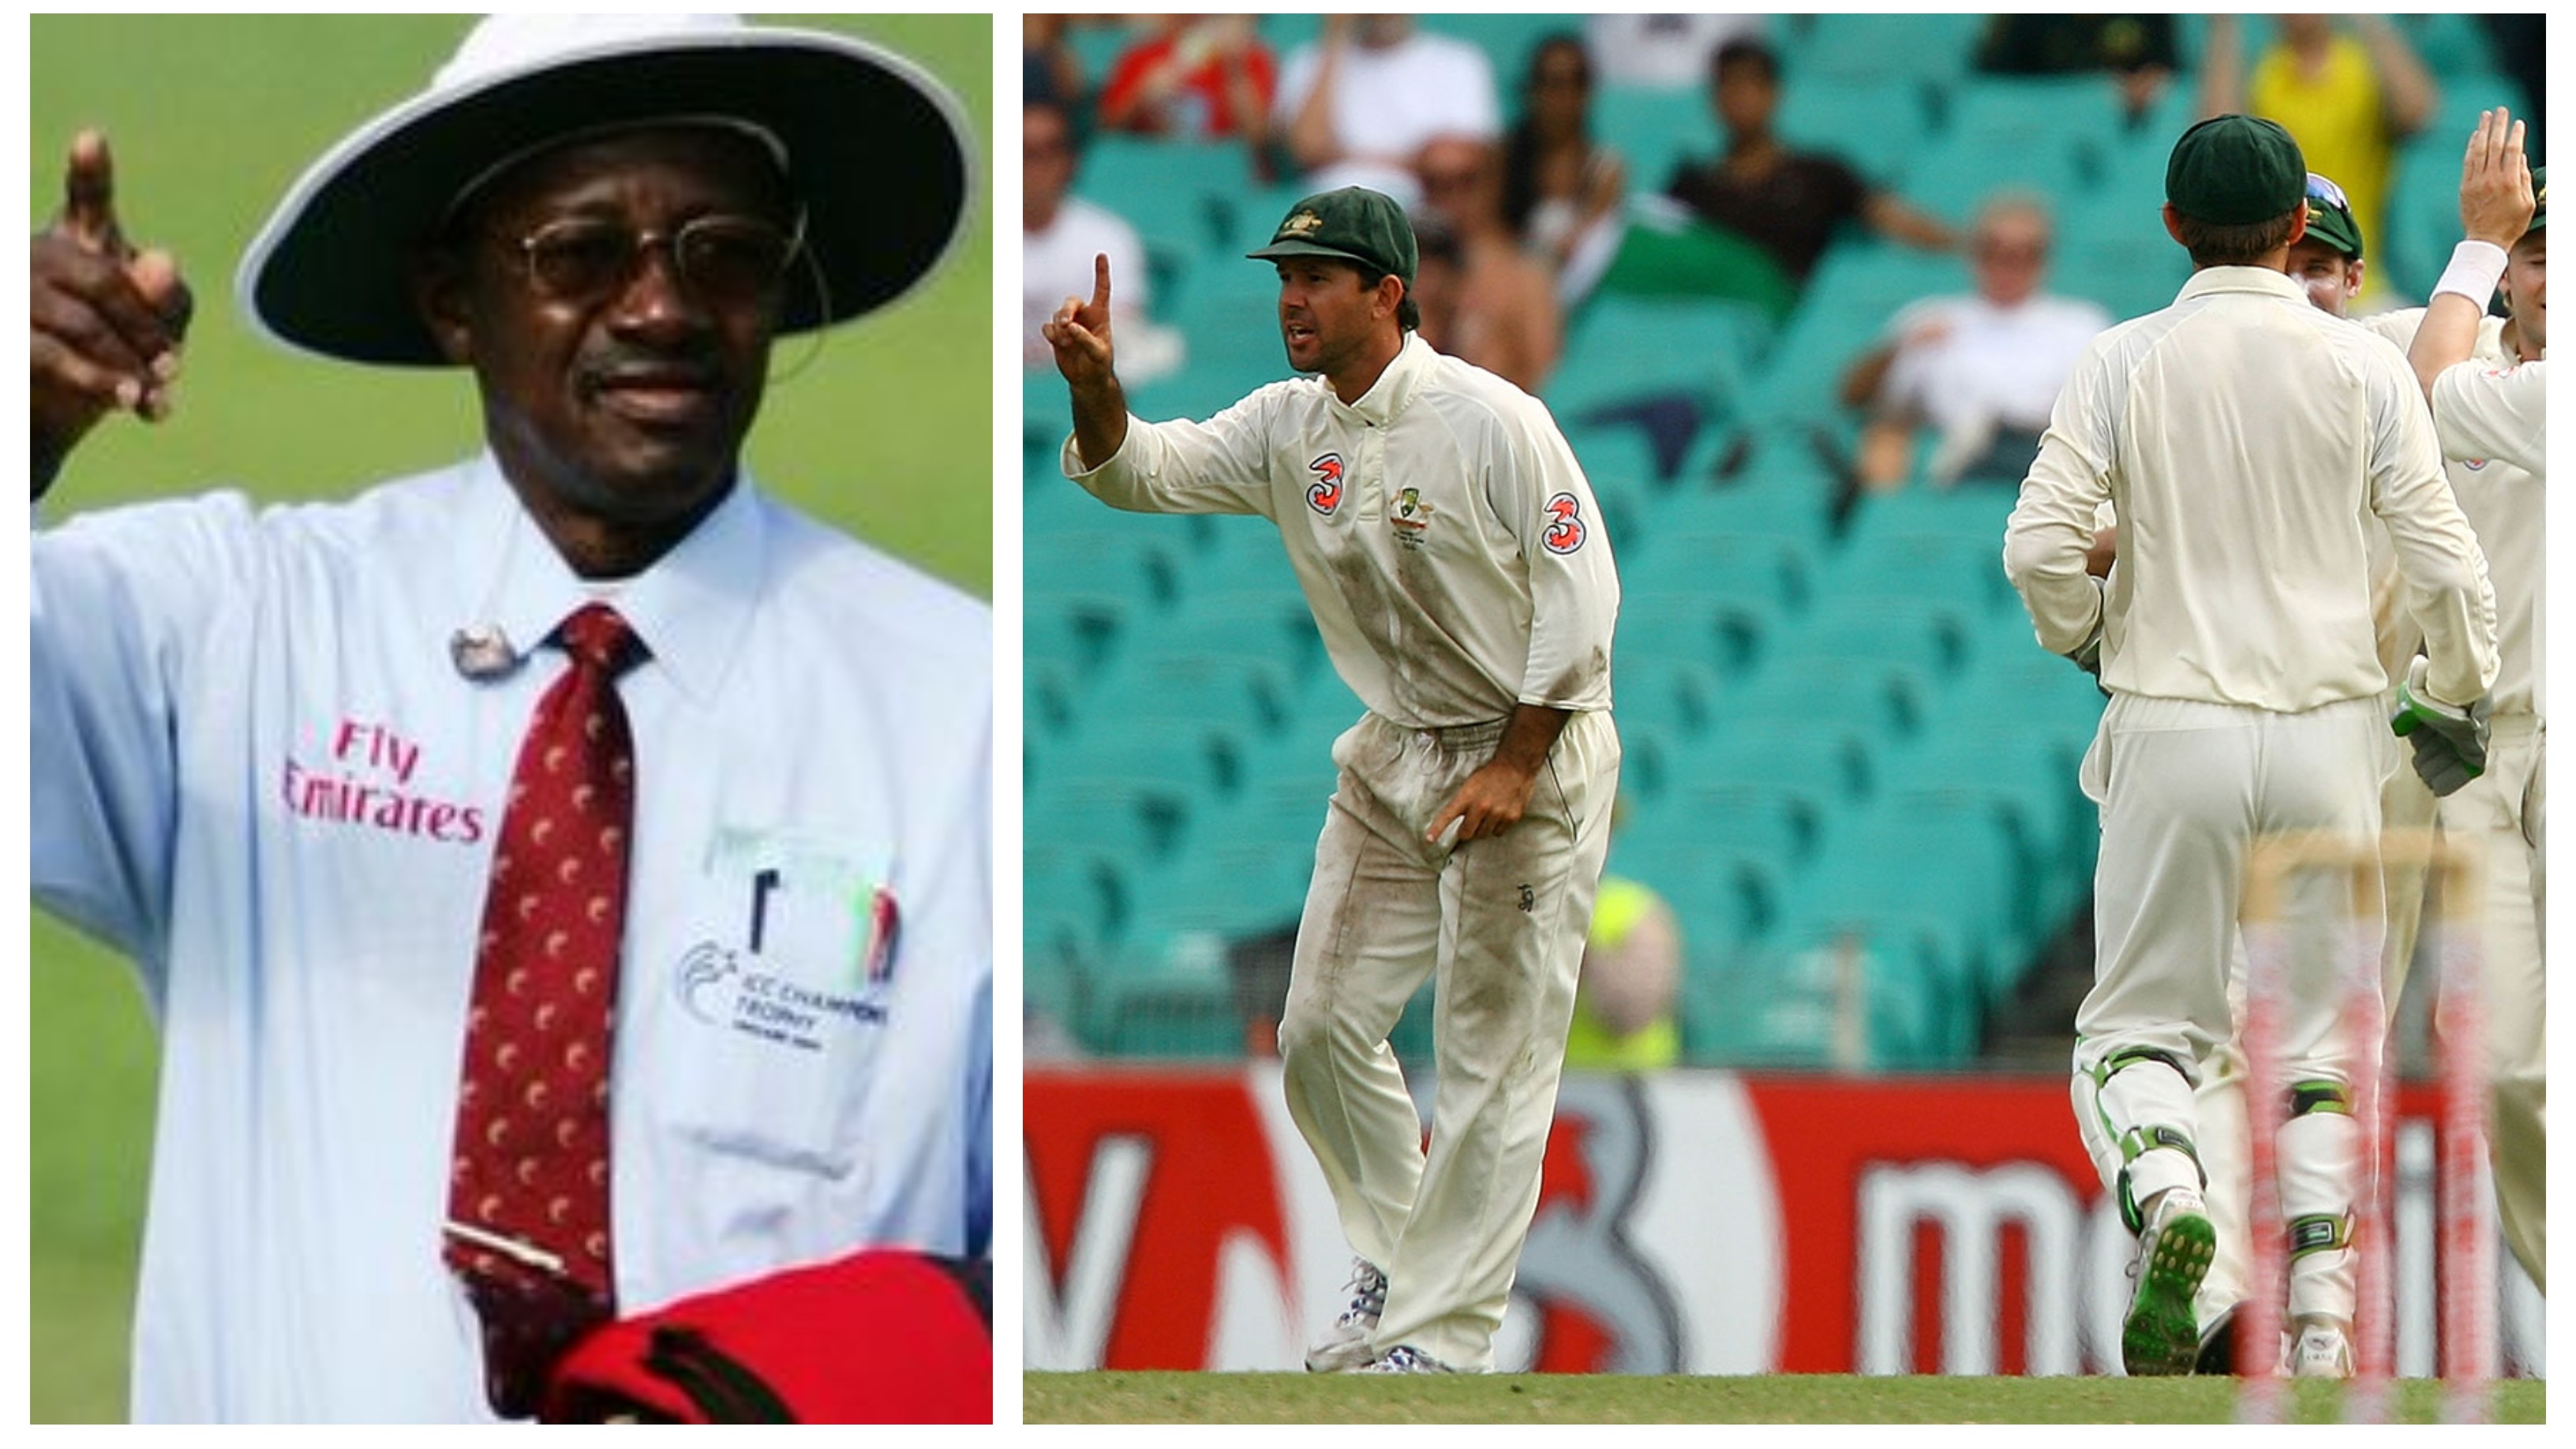 Steve Bucknor recalls two mistakes in 2008 Sydney Test that ‘might have cost India’